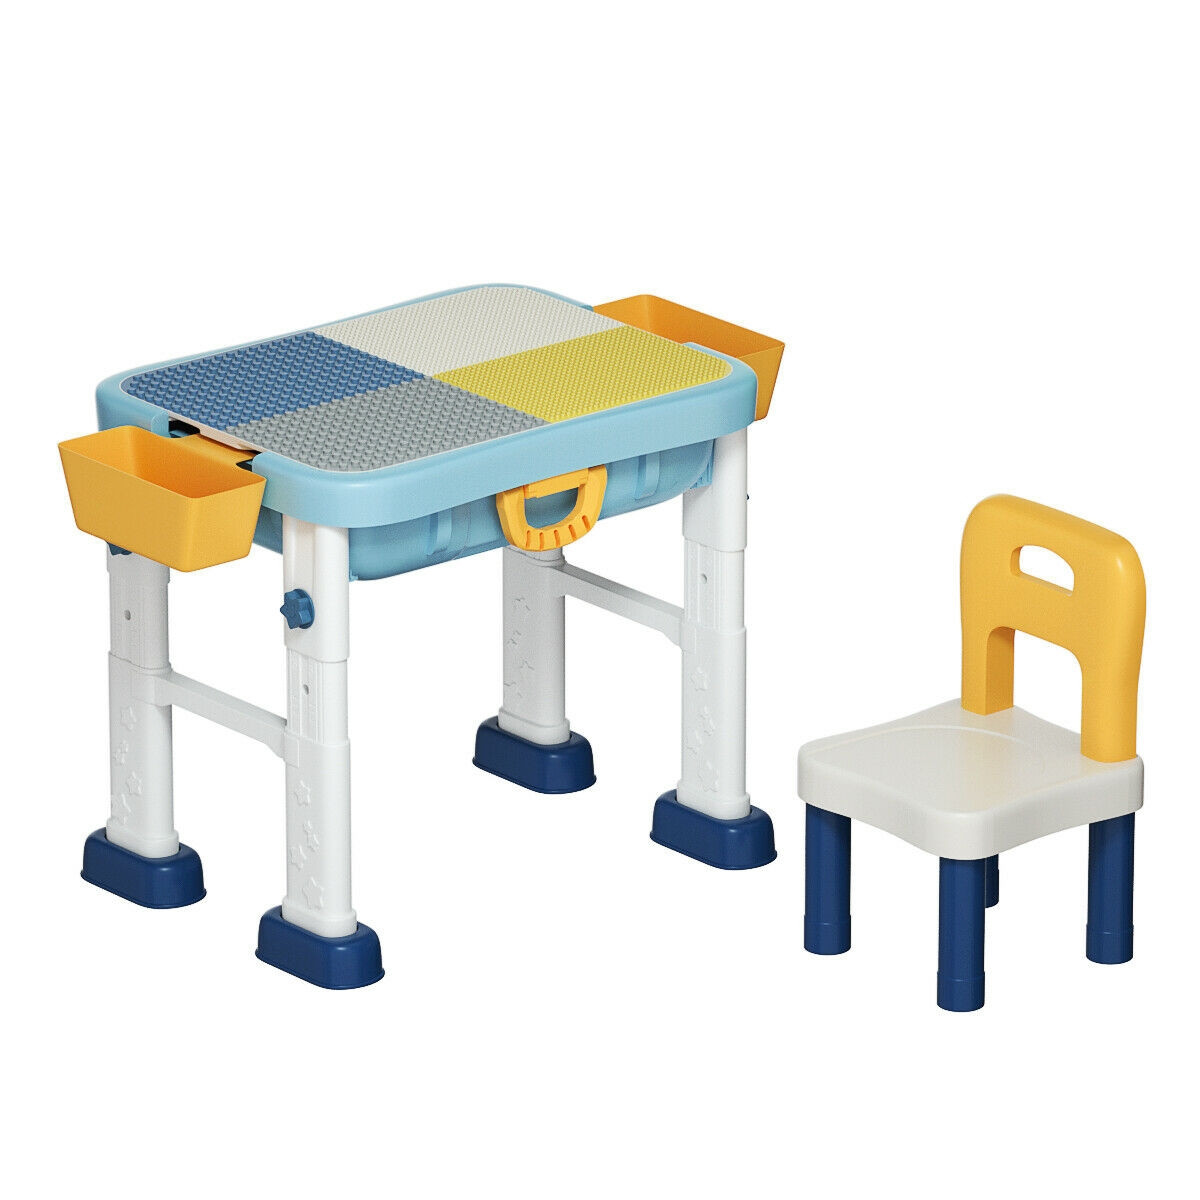 children's activity table and chairs